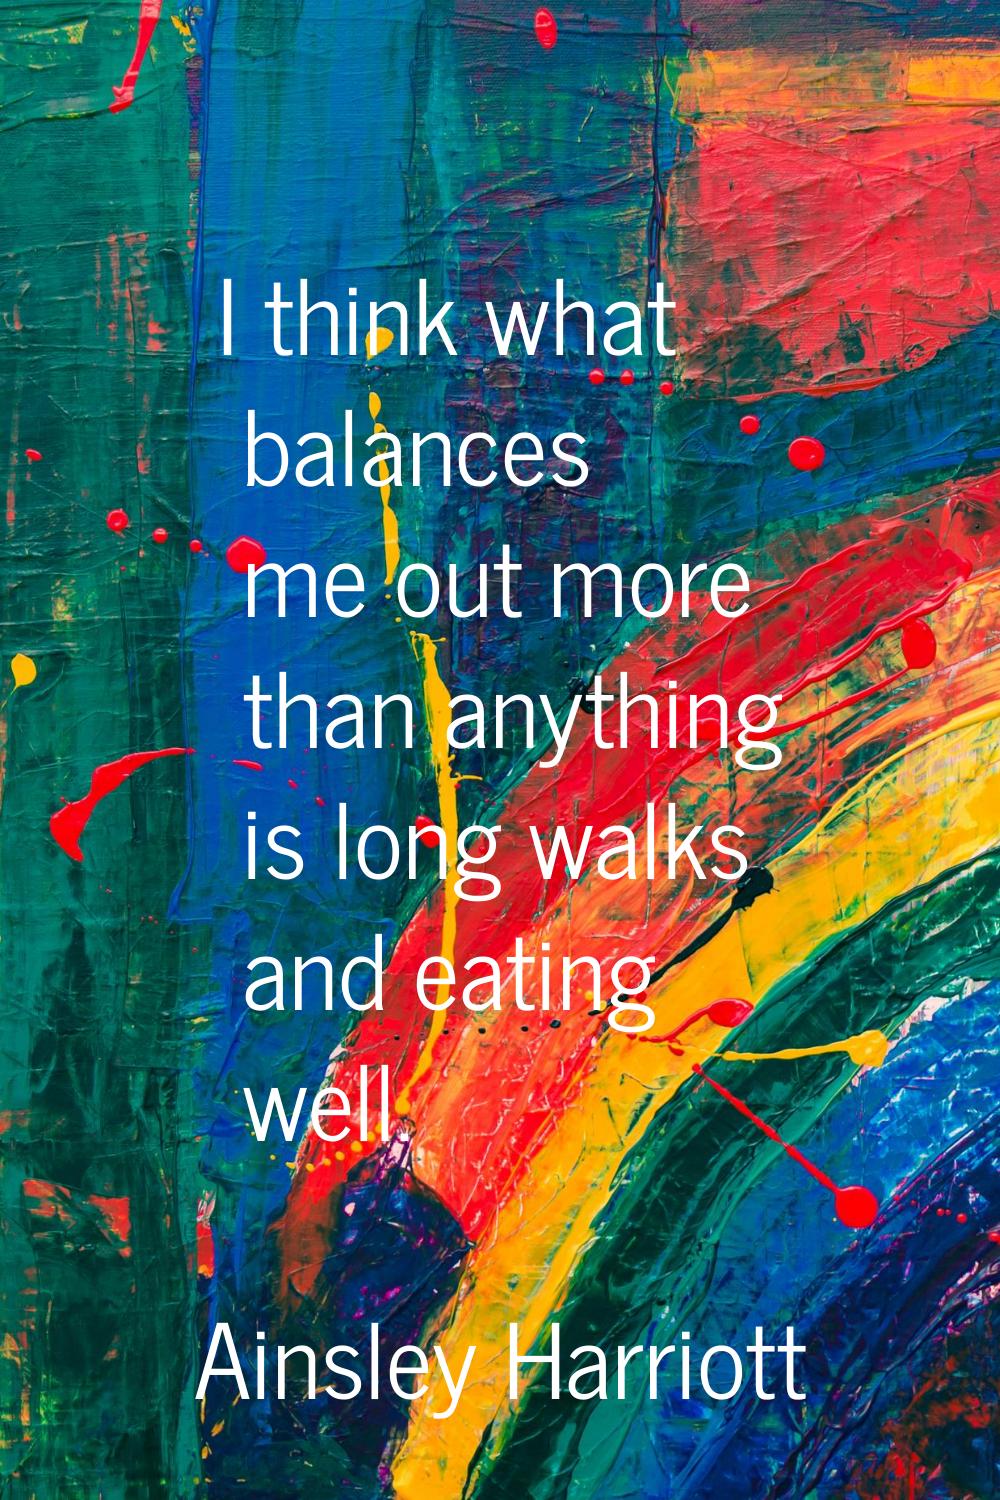 I think what balances me out more than anything is long walks and eating well.